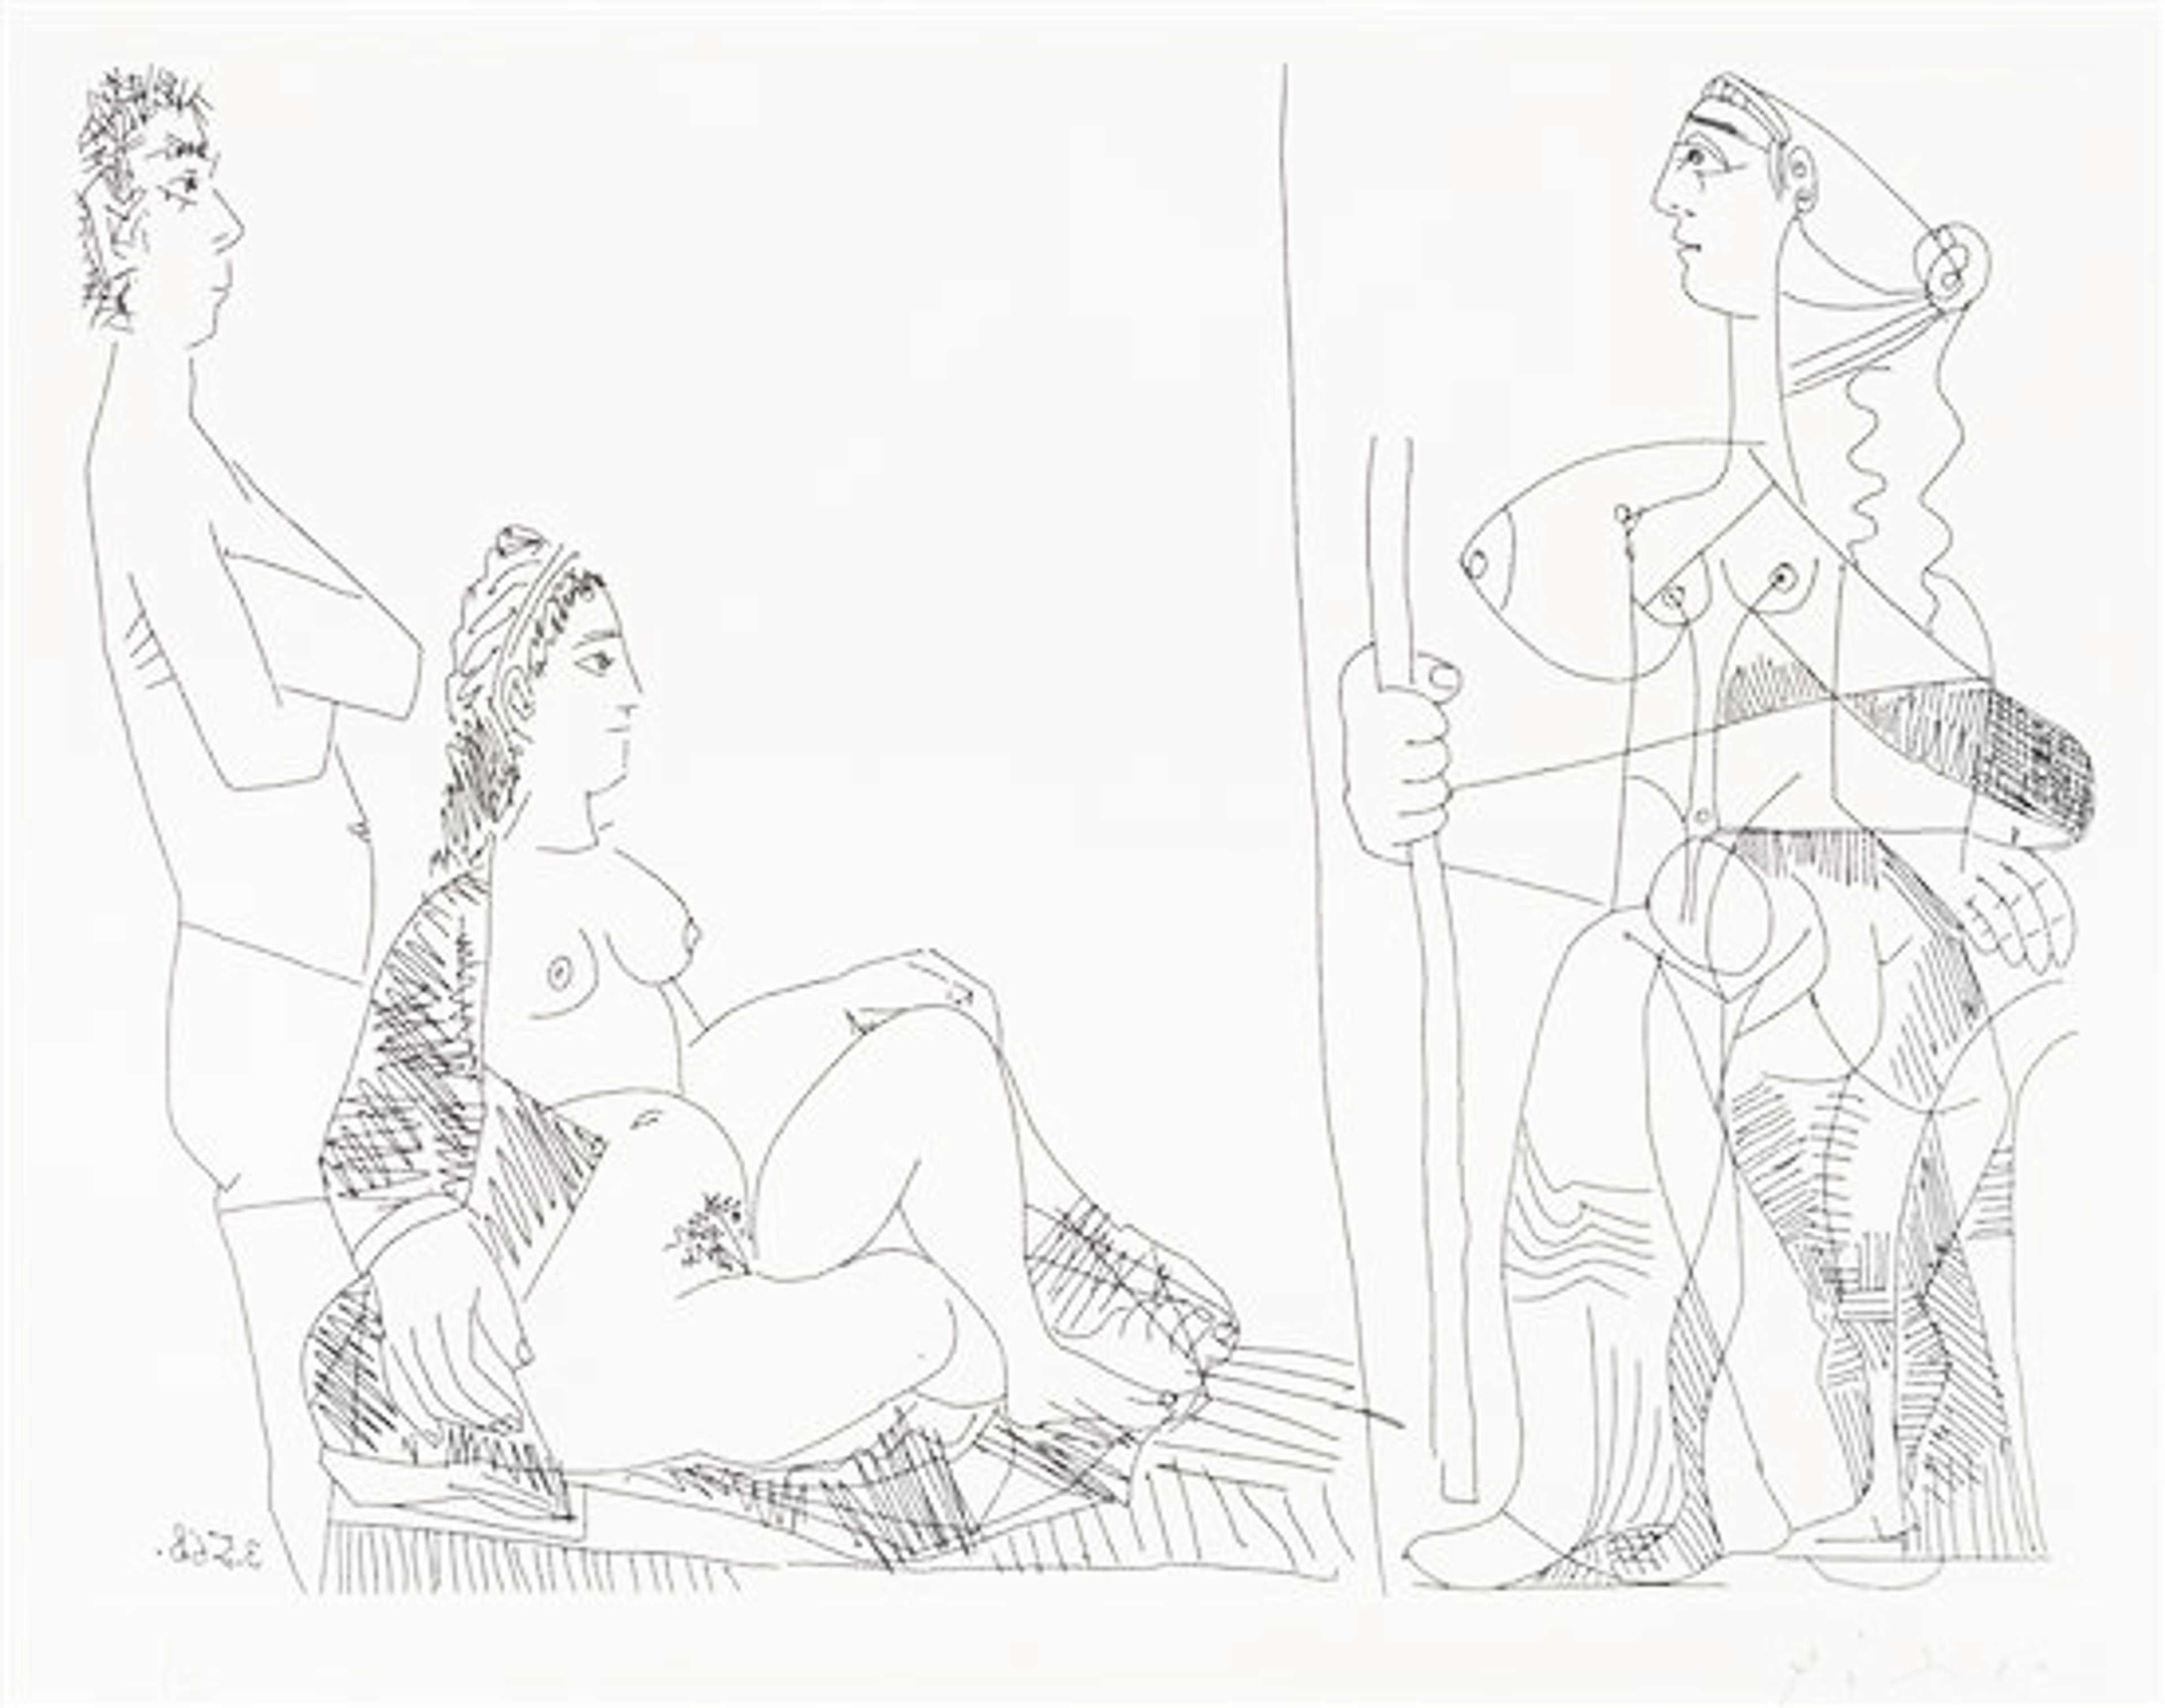 An image of the artwork Couple Et Voyageuse by Pablo Picasso. It shows three human figures depicted in linework, with the two figures on the left being shown in a more realistic style, while the one on the right is in Picasso's distinct Cubist style.